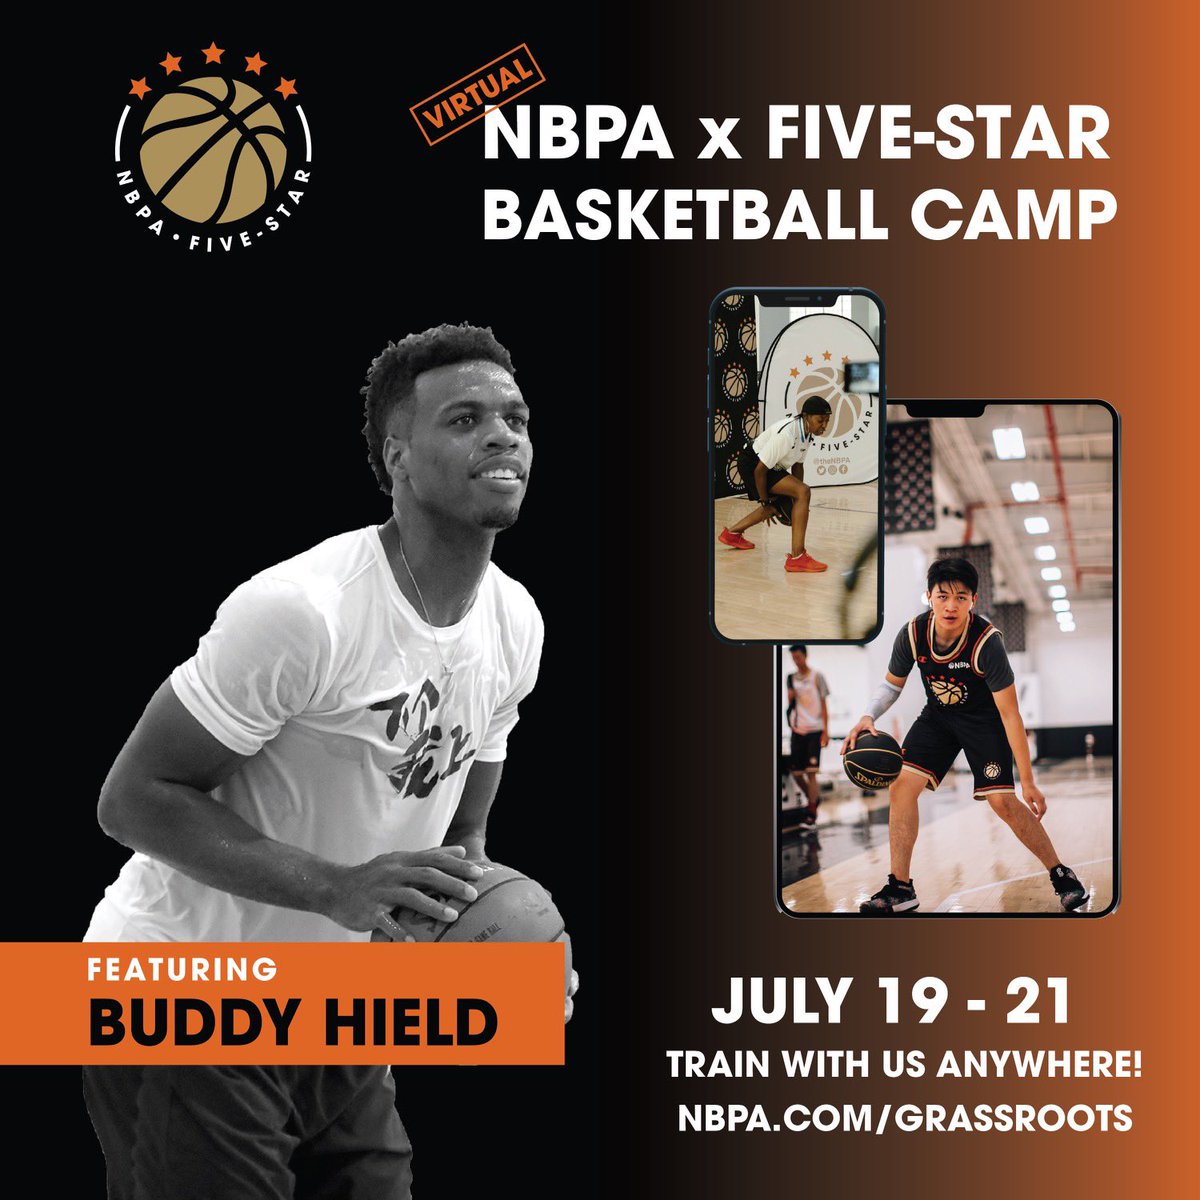 Join me and other NBPA members on July 19-21 and take your game to the next level at @thenbpa x @5starbasketball virtual camp. Lock your spot in by signing up NOW at nbpa.com/grassroots #NBPATrainWithUs